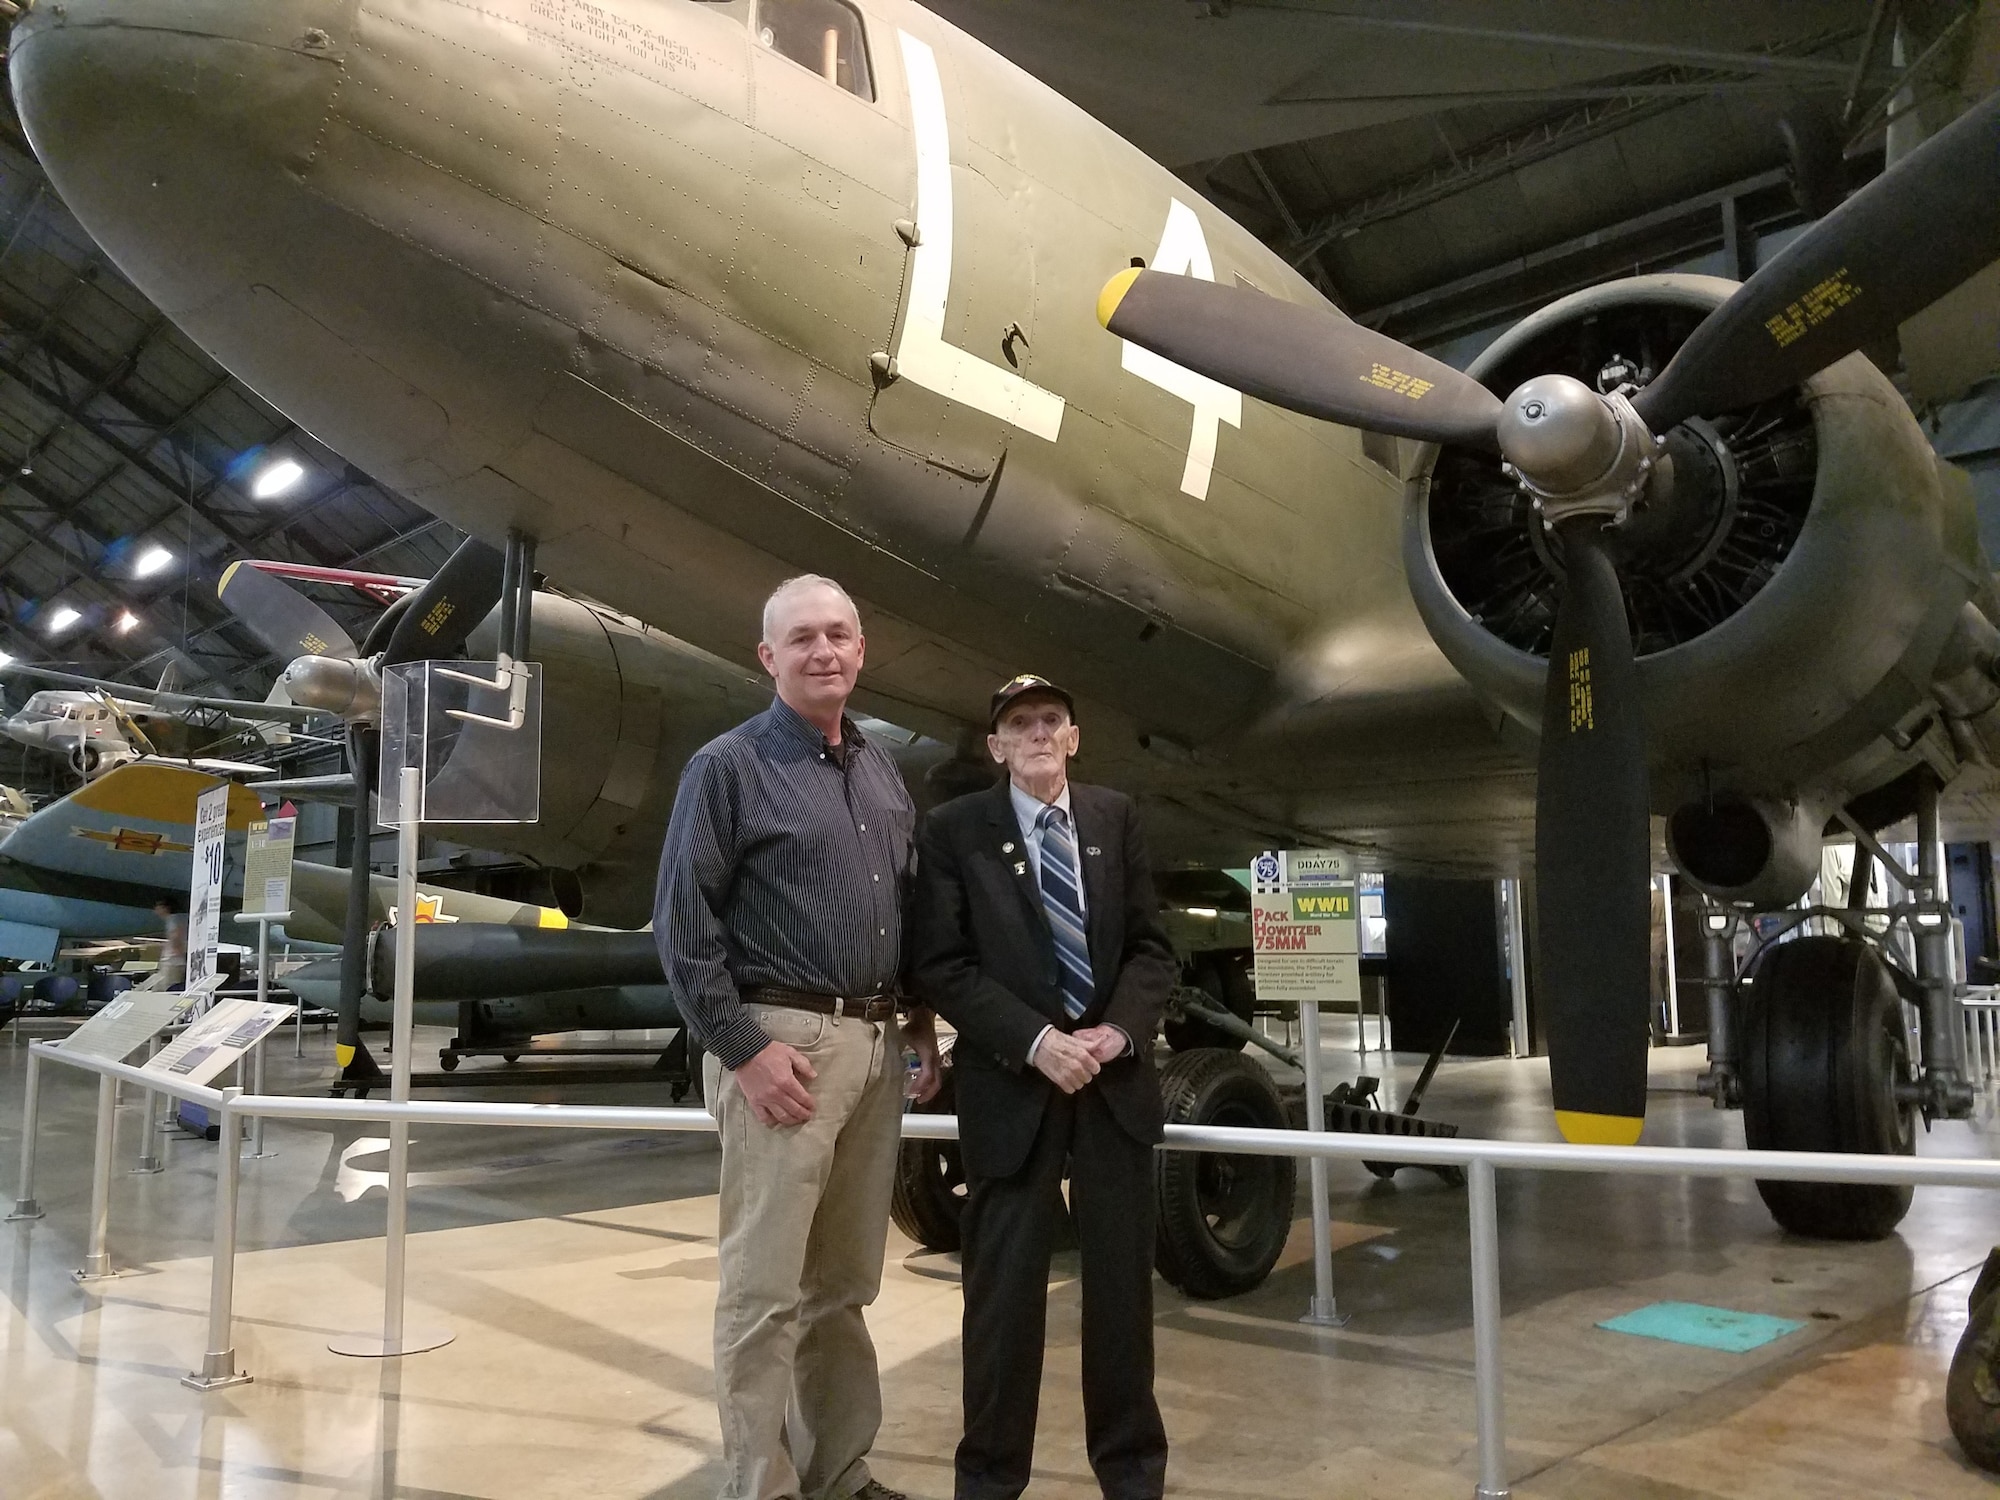 Air Force Research Laboratory Aerospace Systems Directorate employee Kevin Price (left) and World War II veteran Jim “Pee Wee” Martin look over the C-47 aircraft displayed at the National Museum of the United States Air Force on August 30, 2019. Price will accompany the 98-year-old Martin in September as he travels to the Netherlands to parachute into the region he helped liberate 75 years ago as part of Operation Market Garden. (U.S. Air Force Photo/Holly Jordan)